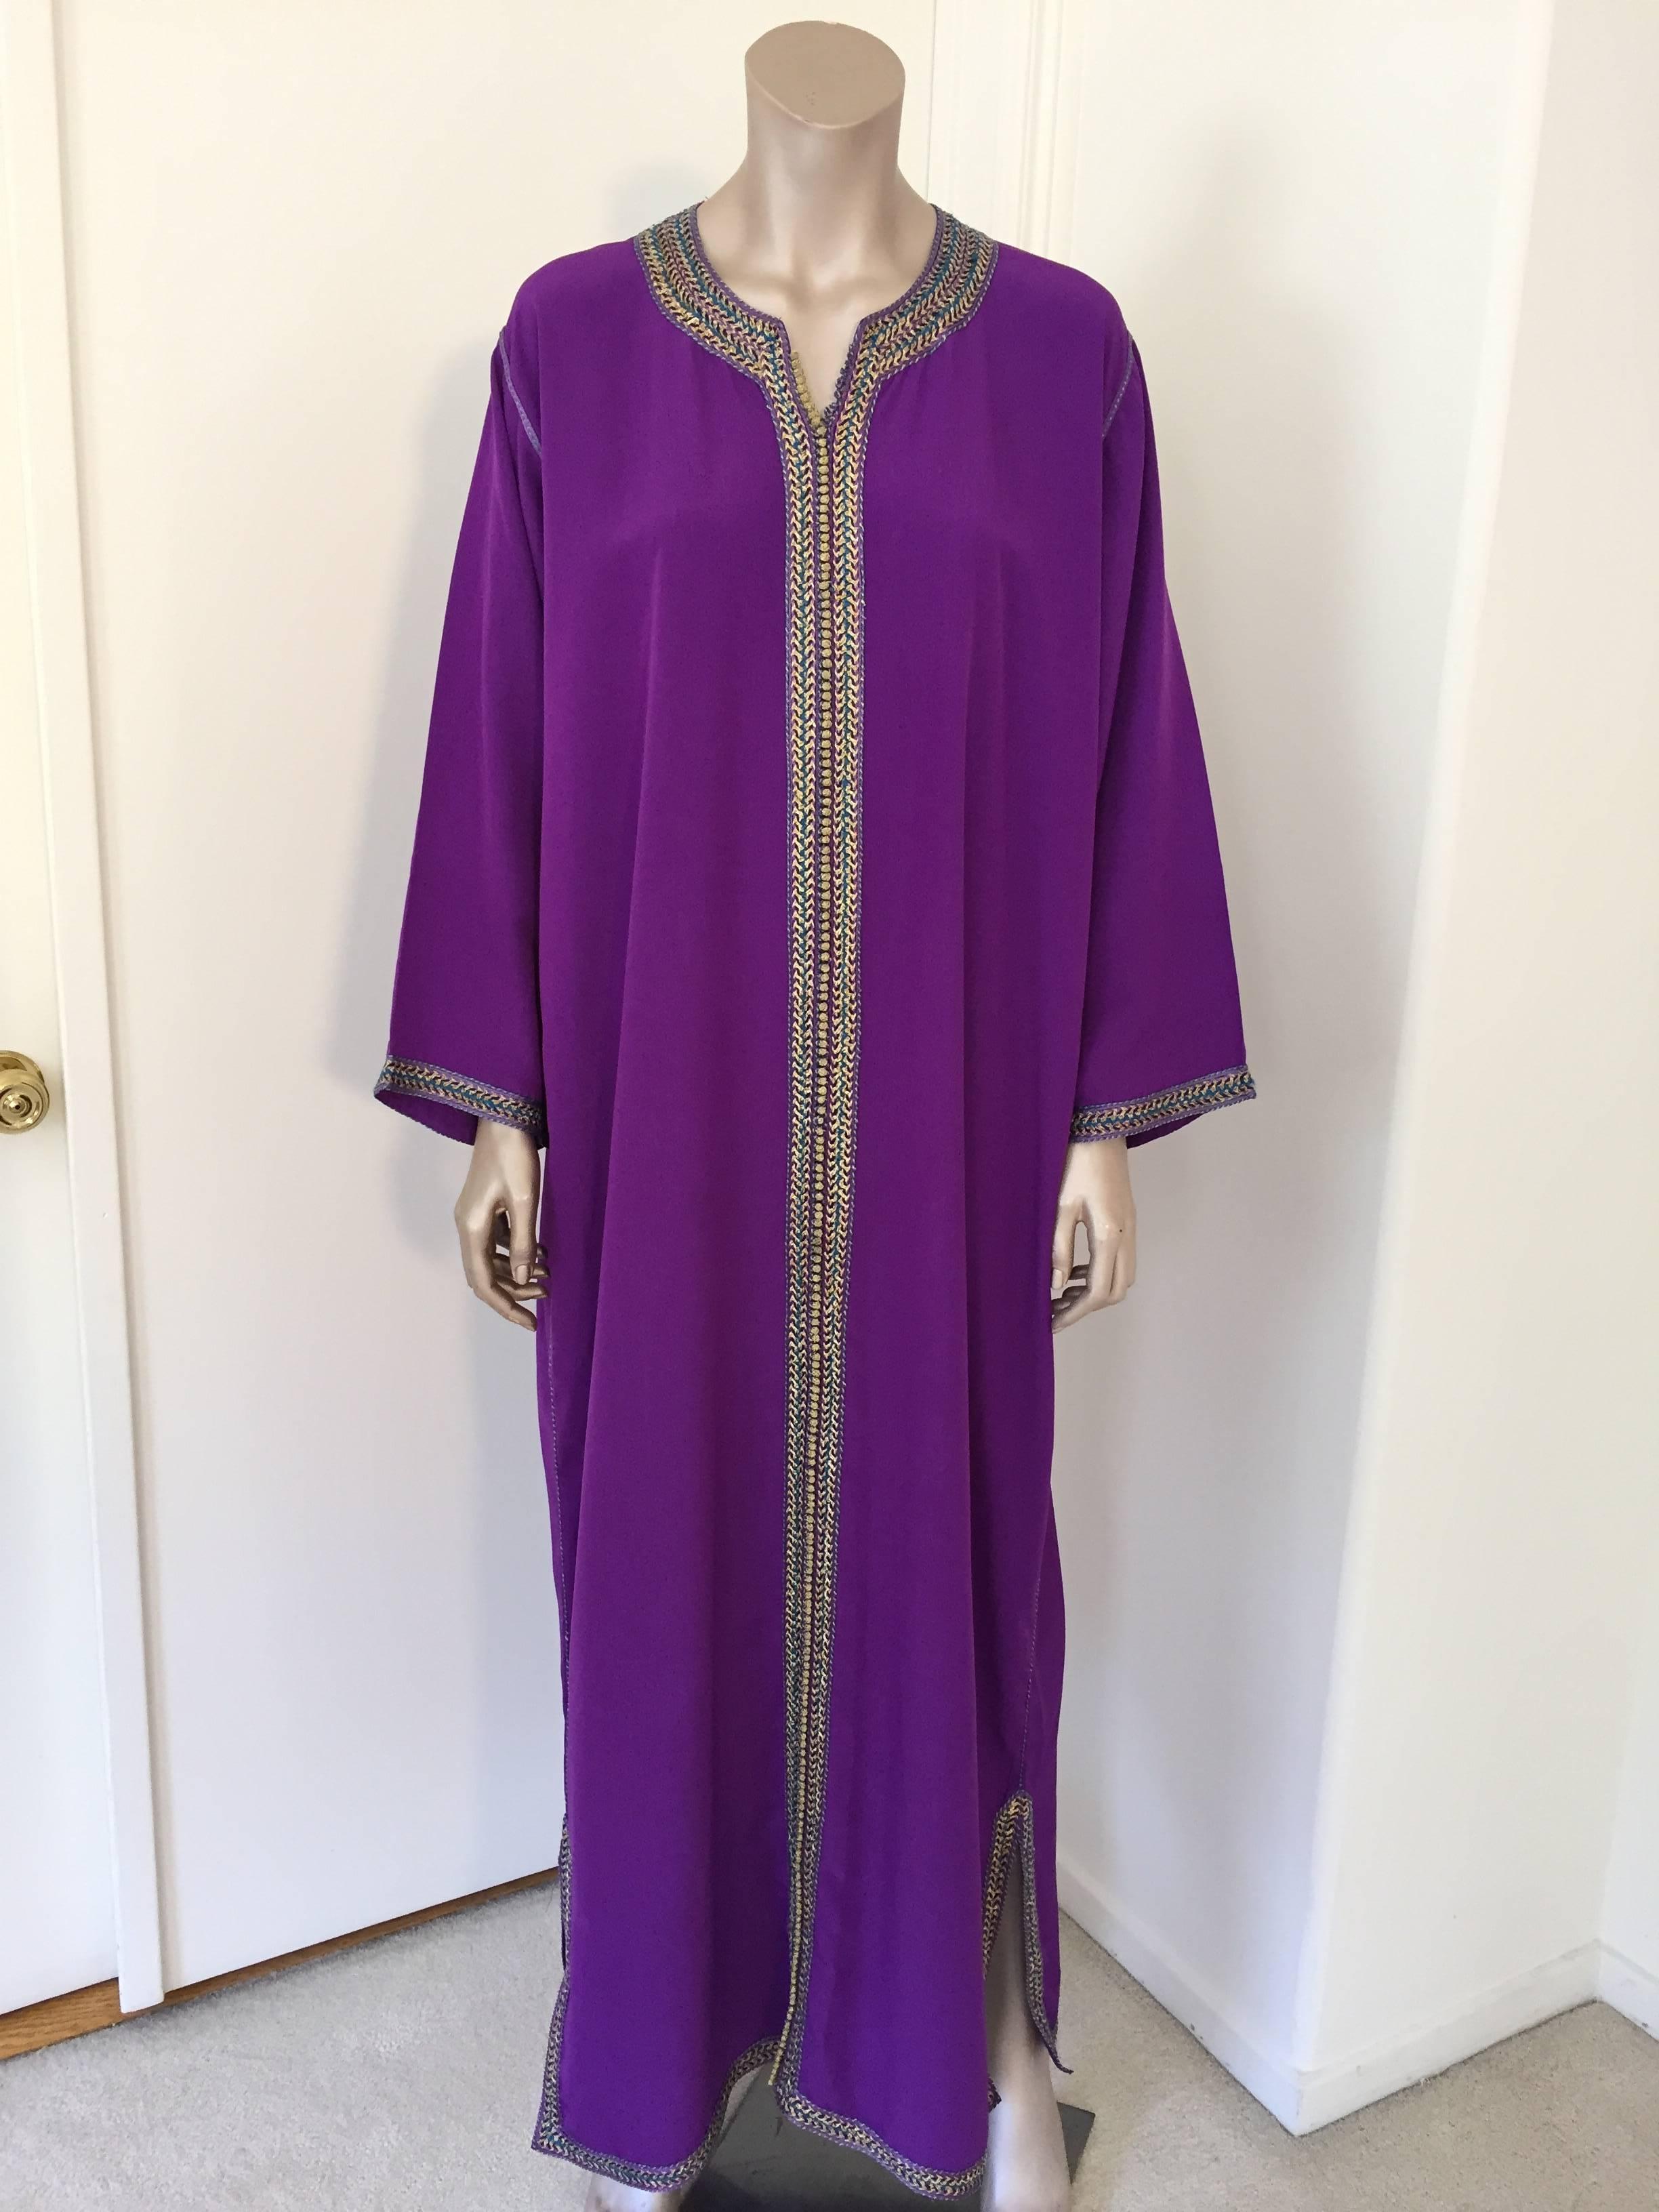 Elegant Moroccan caftan purple violet color embroidered with gold trim,
circa 1970s.
This long maxi dress kaftan is embroidered and embellished entirely by hand.
One of a kind evening Moroccan Middle Eastern gown.
The kaftan features a traditional